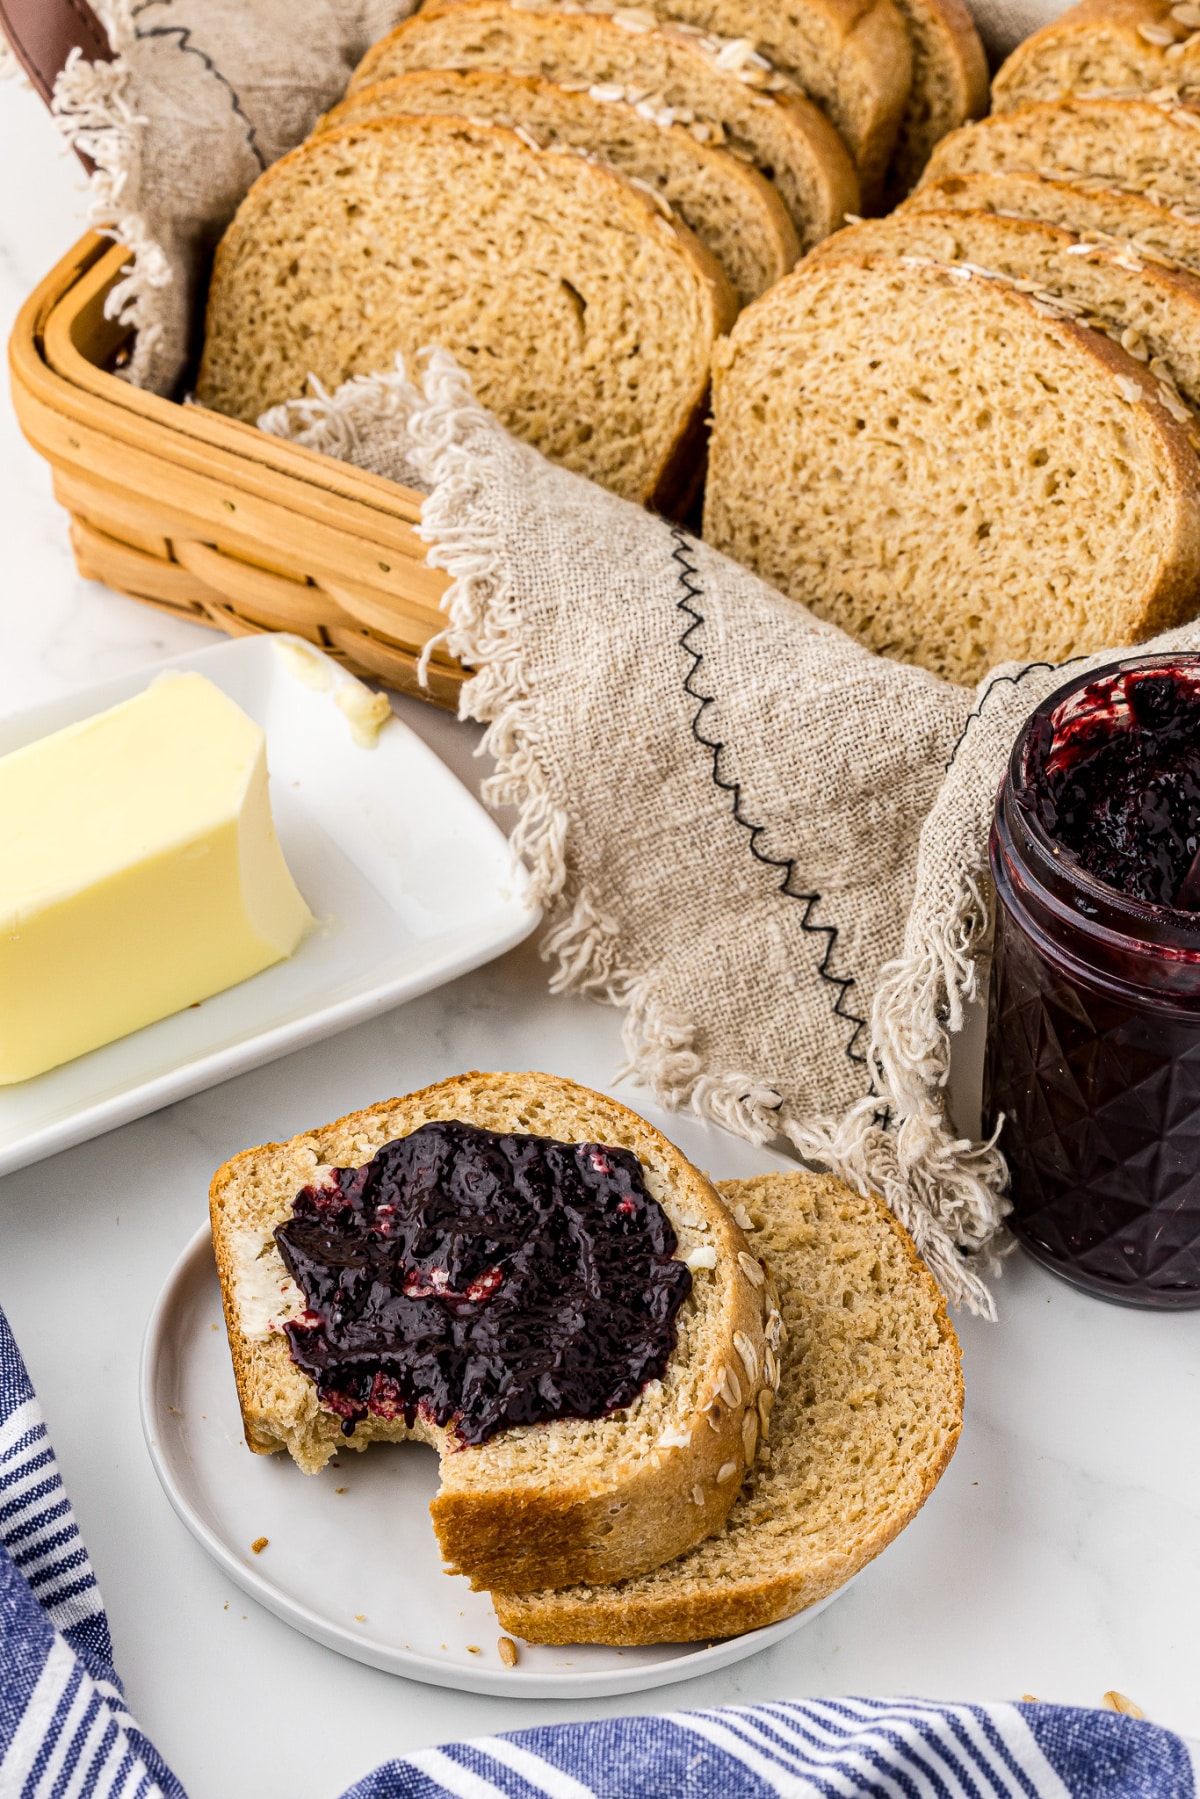 Slices of bread on a white dish with jam topping and a bread basket full of bread along with a jar of jam and a butter dish in the background